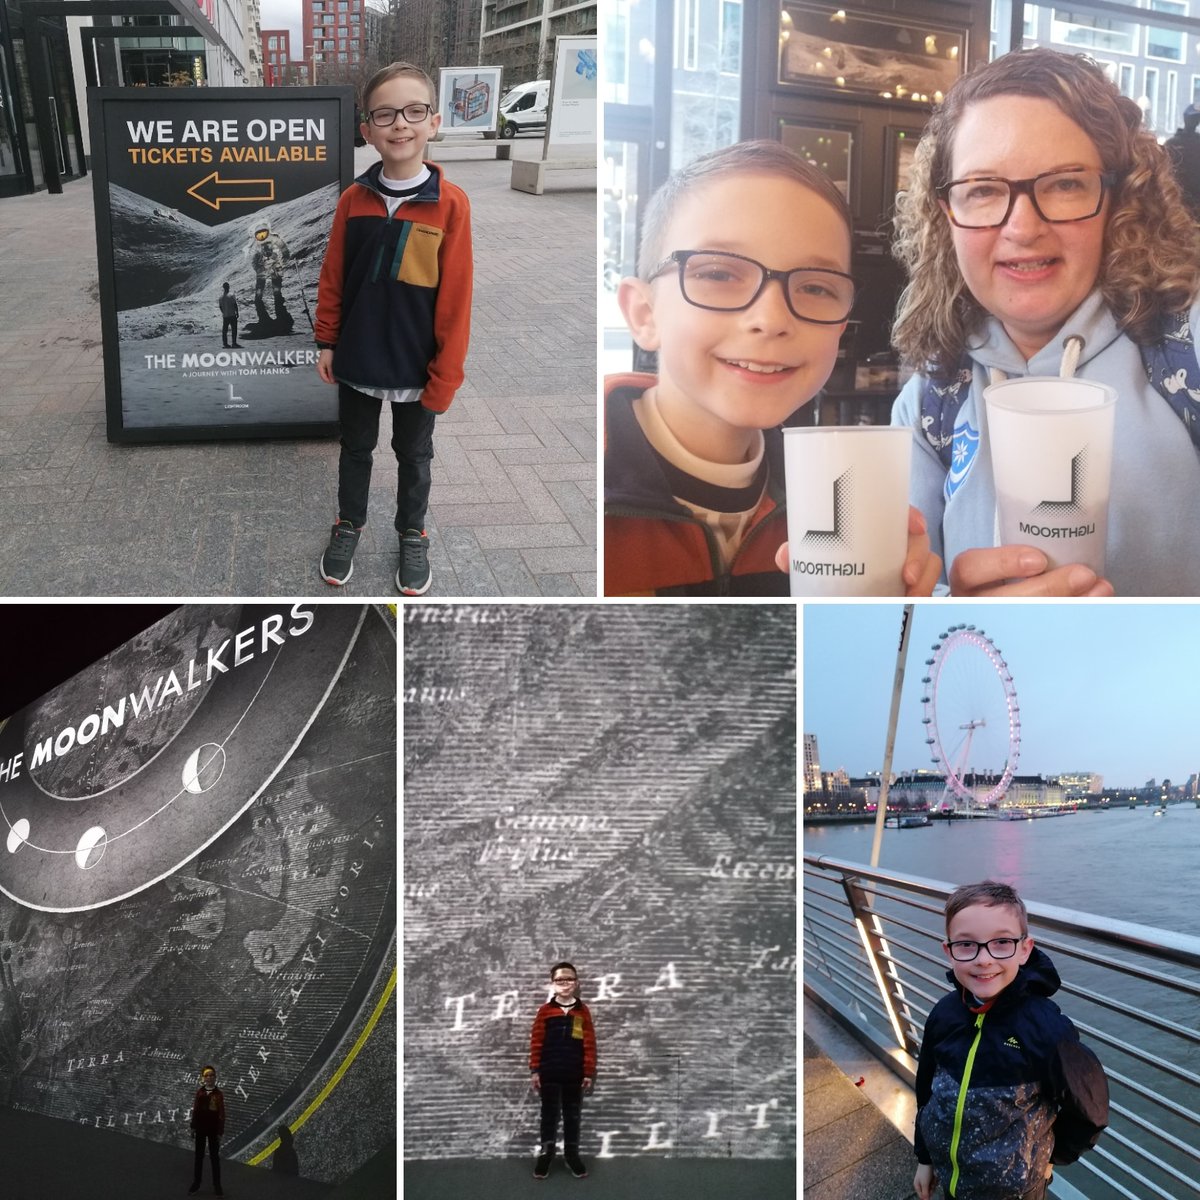 Amazing day spent with Alfie watching the #MoonWalkers journey with Tom Hanks @_LightRoomLDN Incredible, loved it & can't wait to go back! 😍🚀🌑 Staff made it so special & now can't wait for Artemis 11 to #gotothemoon in Sept 2026!! 😁📺 #spacetime #moonlovers #tomhanks #apollo